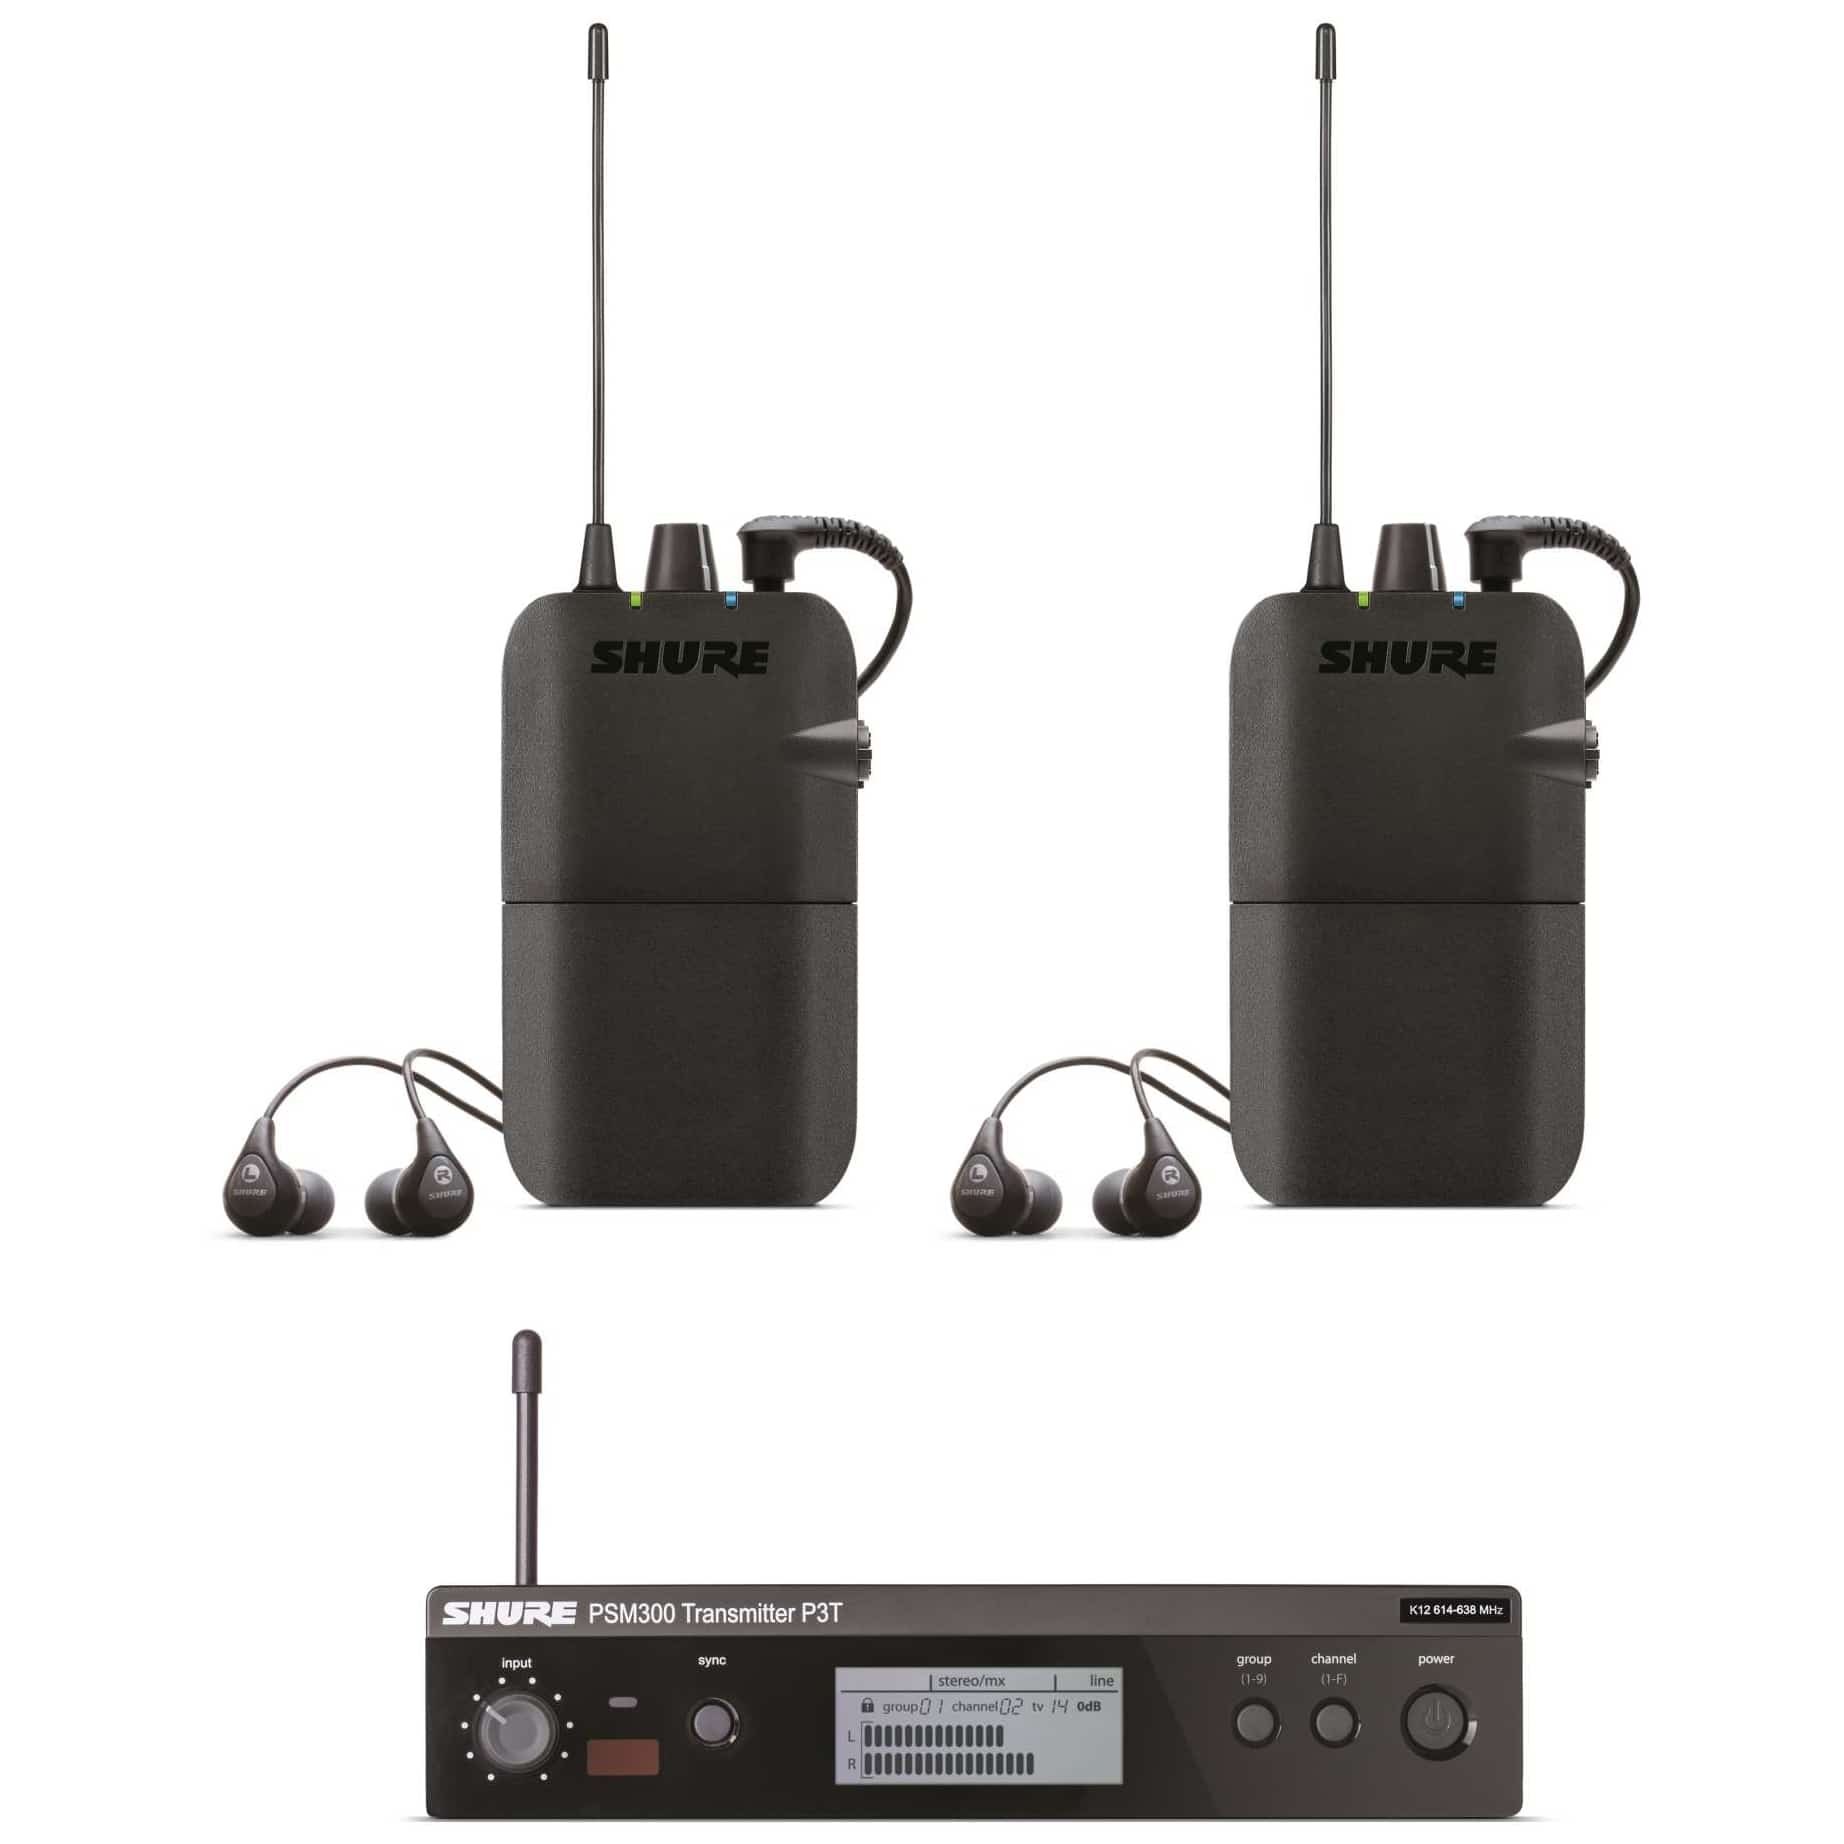 Shure PSM 300 TwinPack P3TER112TW-S8